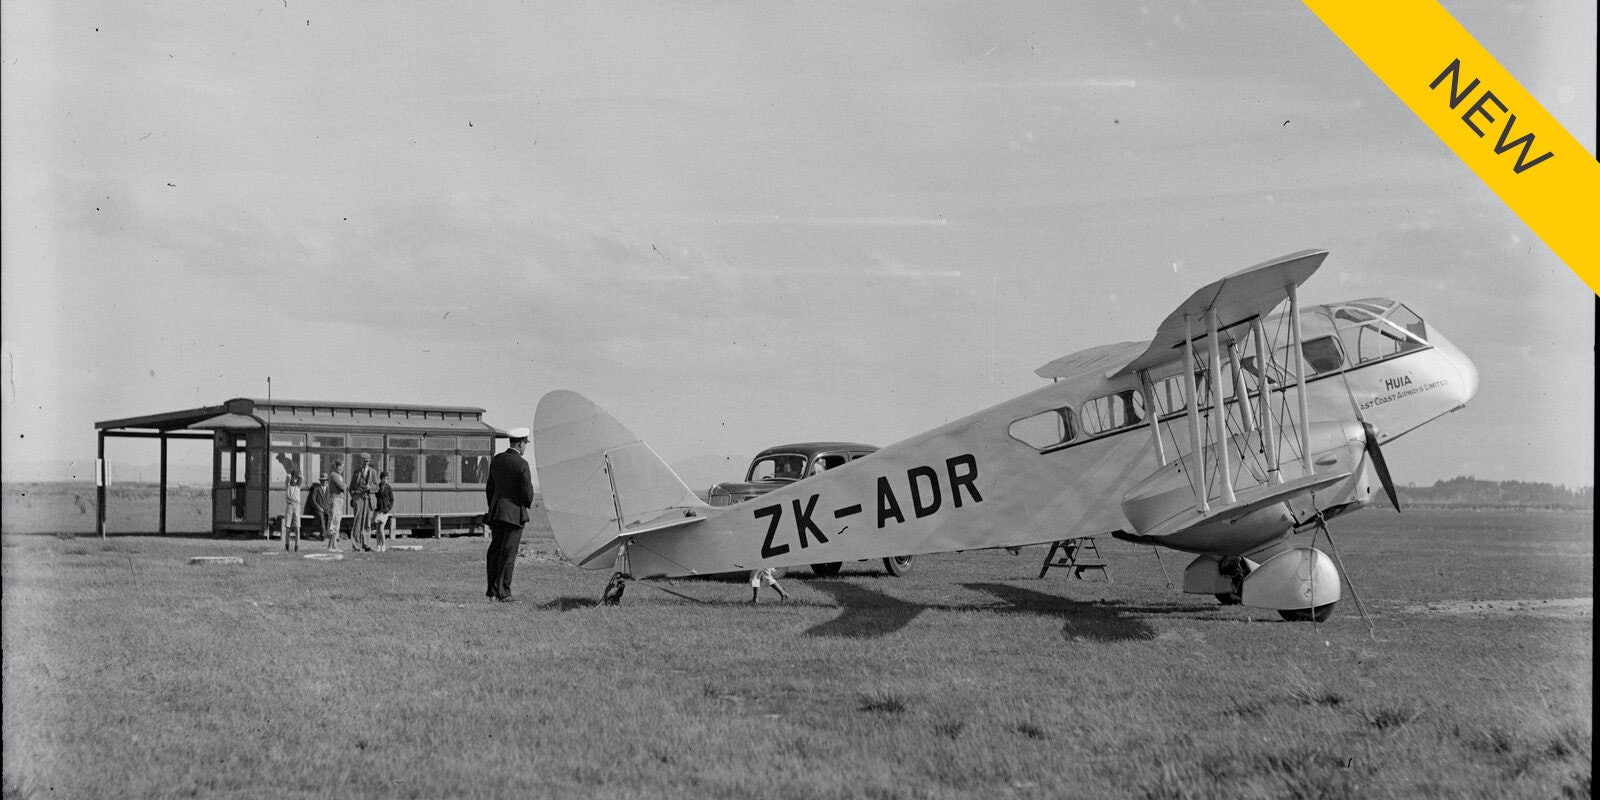 Aero During Deco - A History of Flight in Hawke's Bay